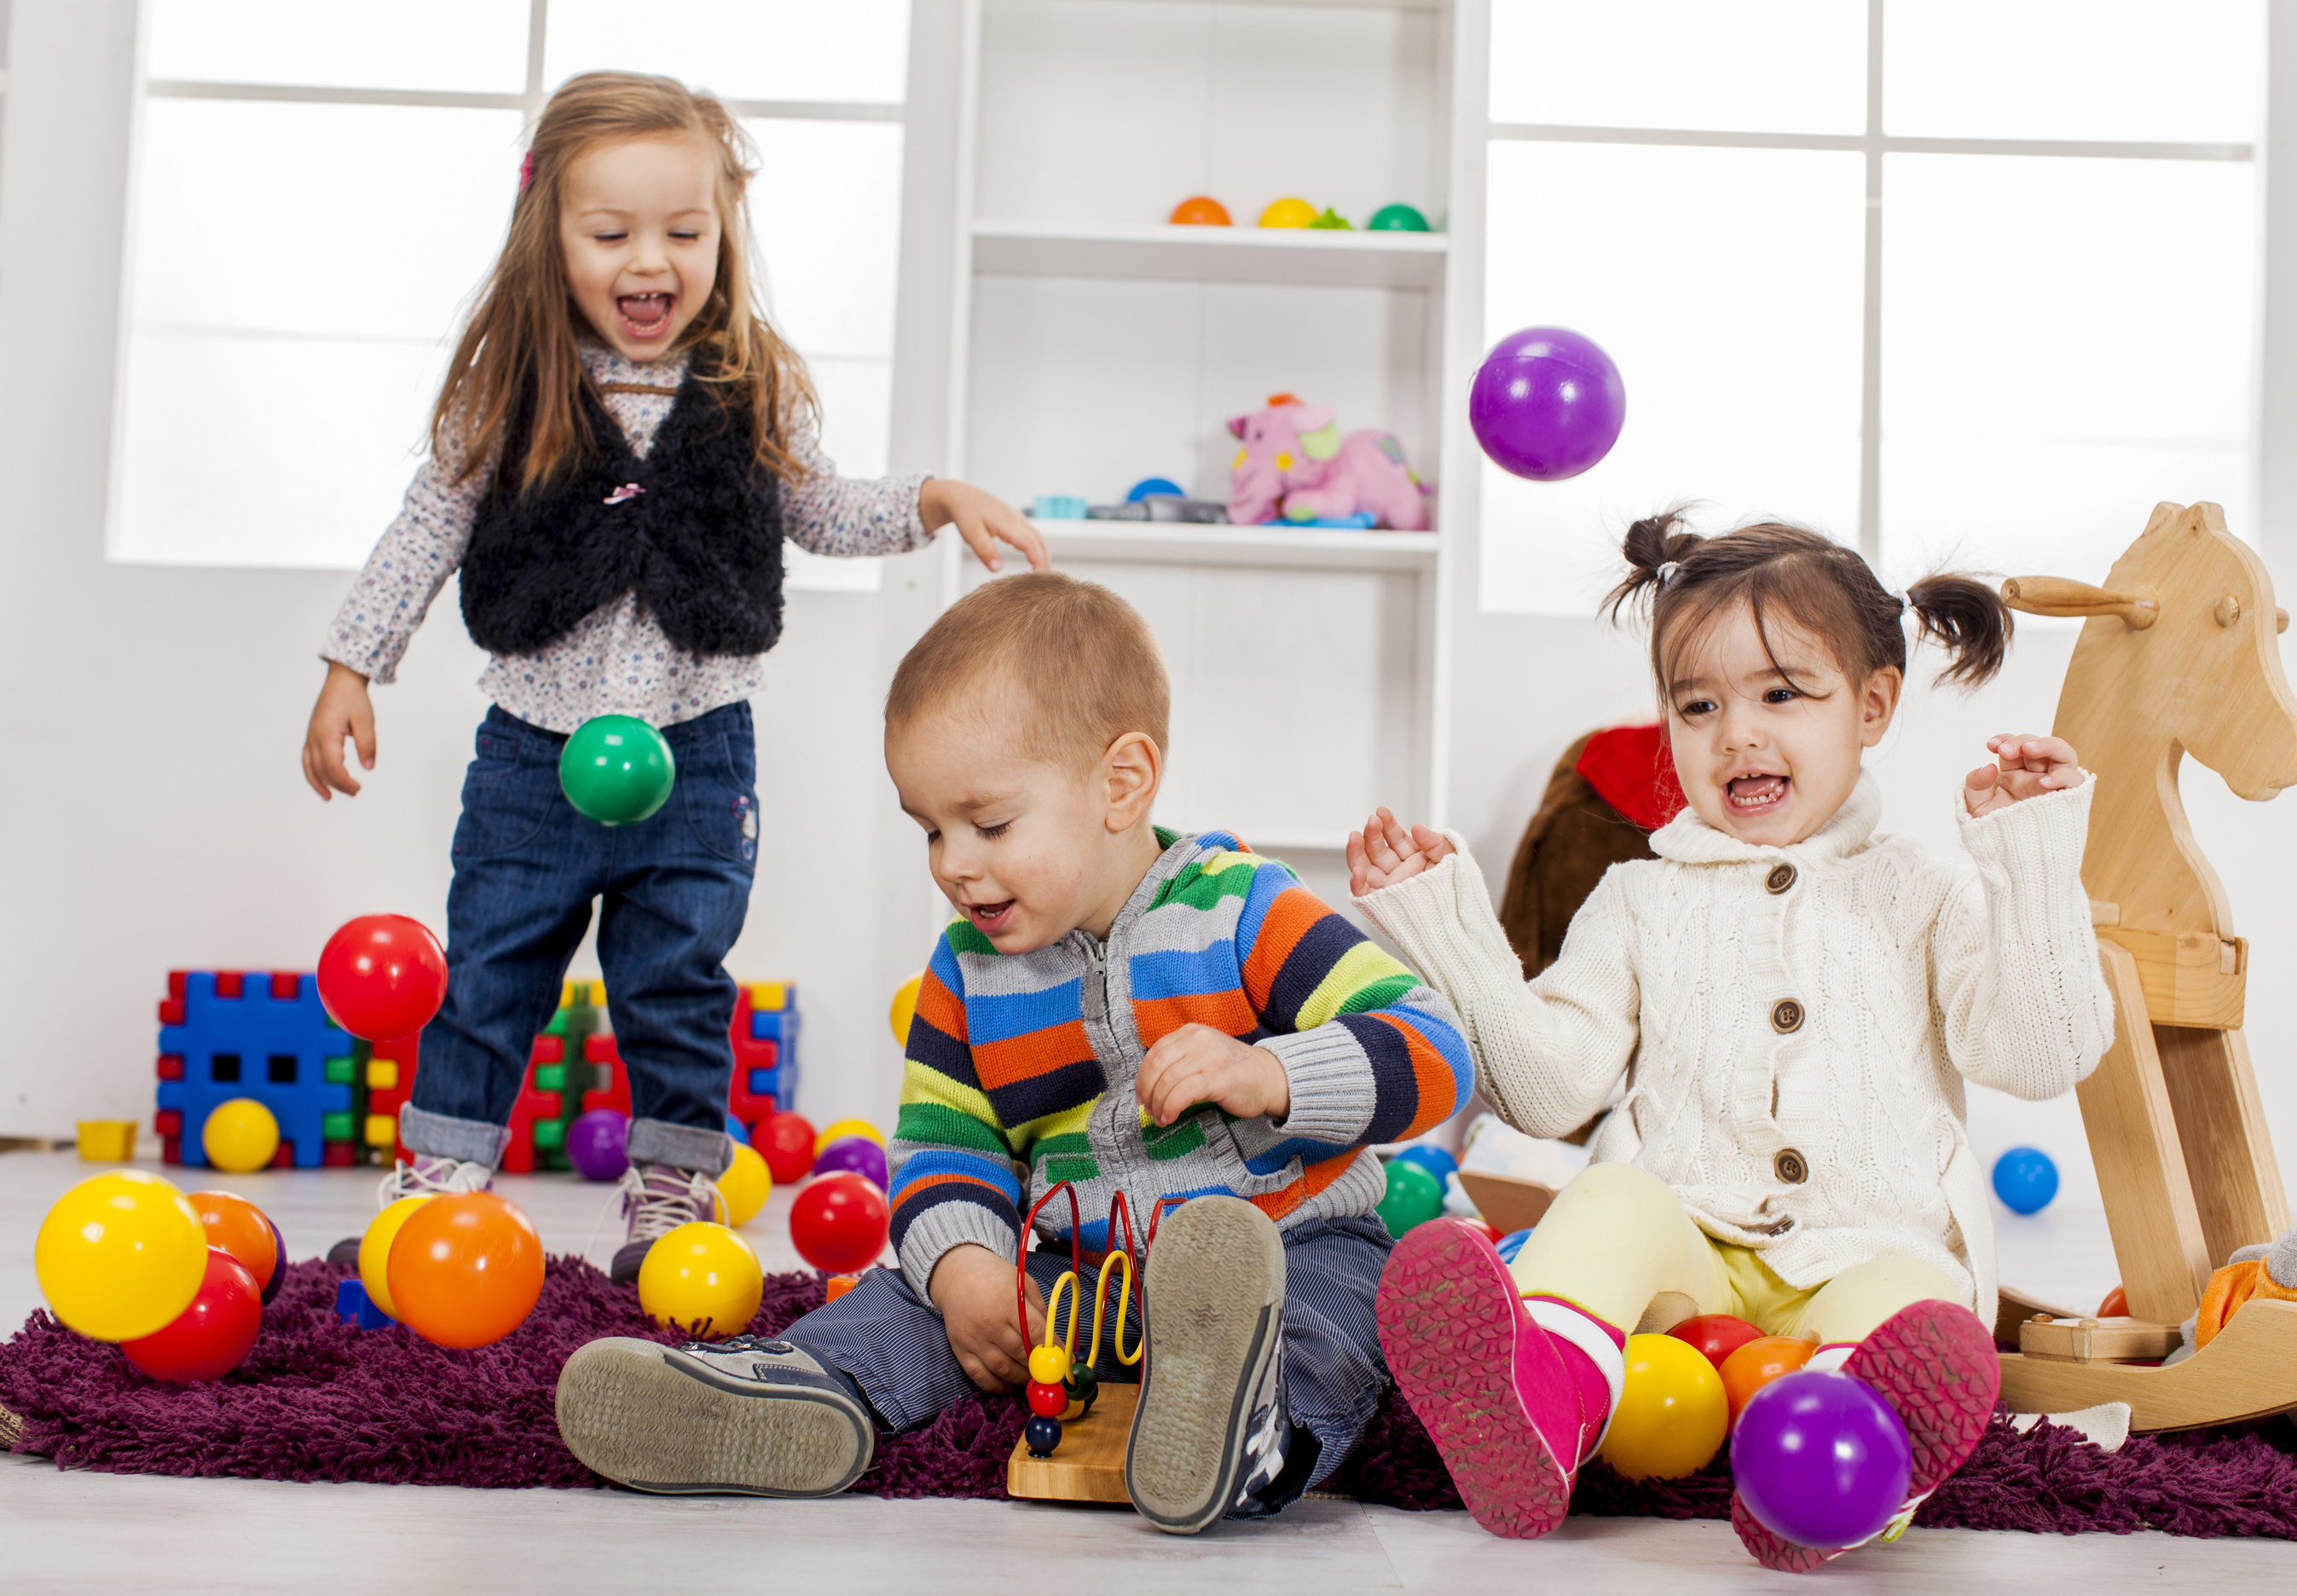 6 Tips For Having A Successful Play Date